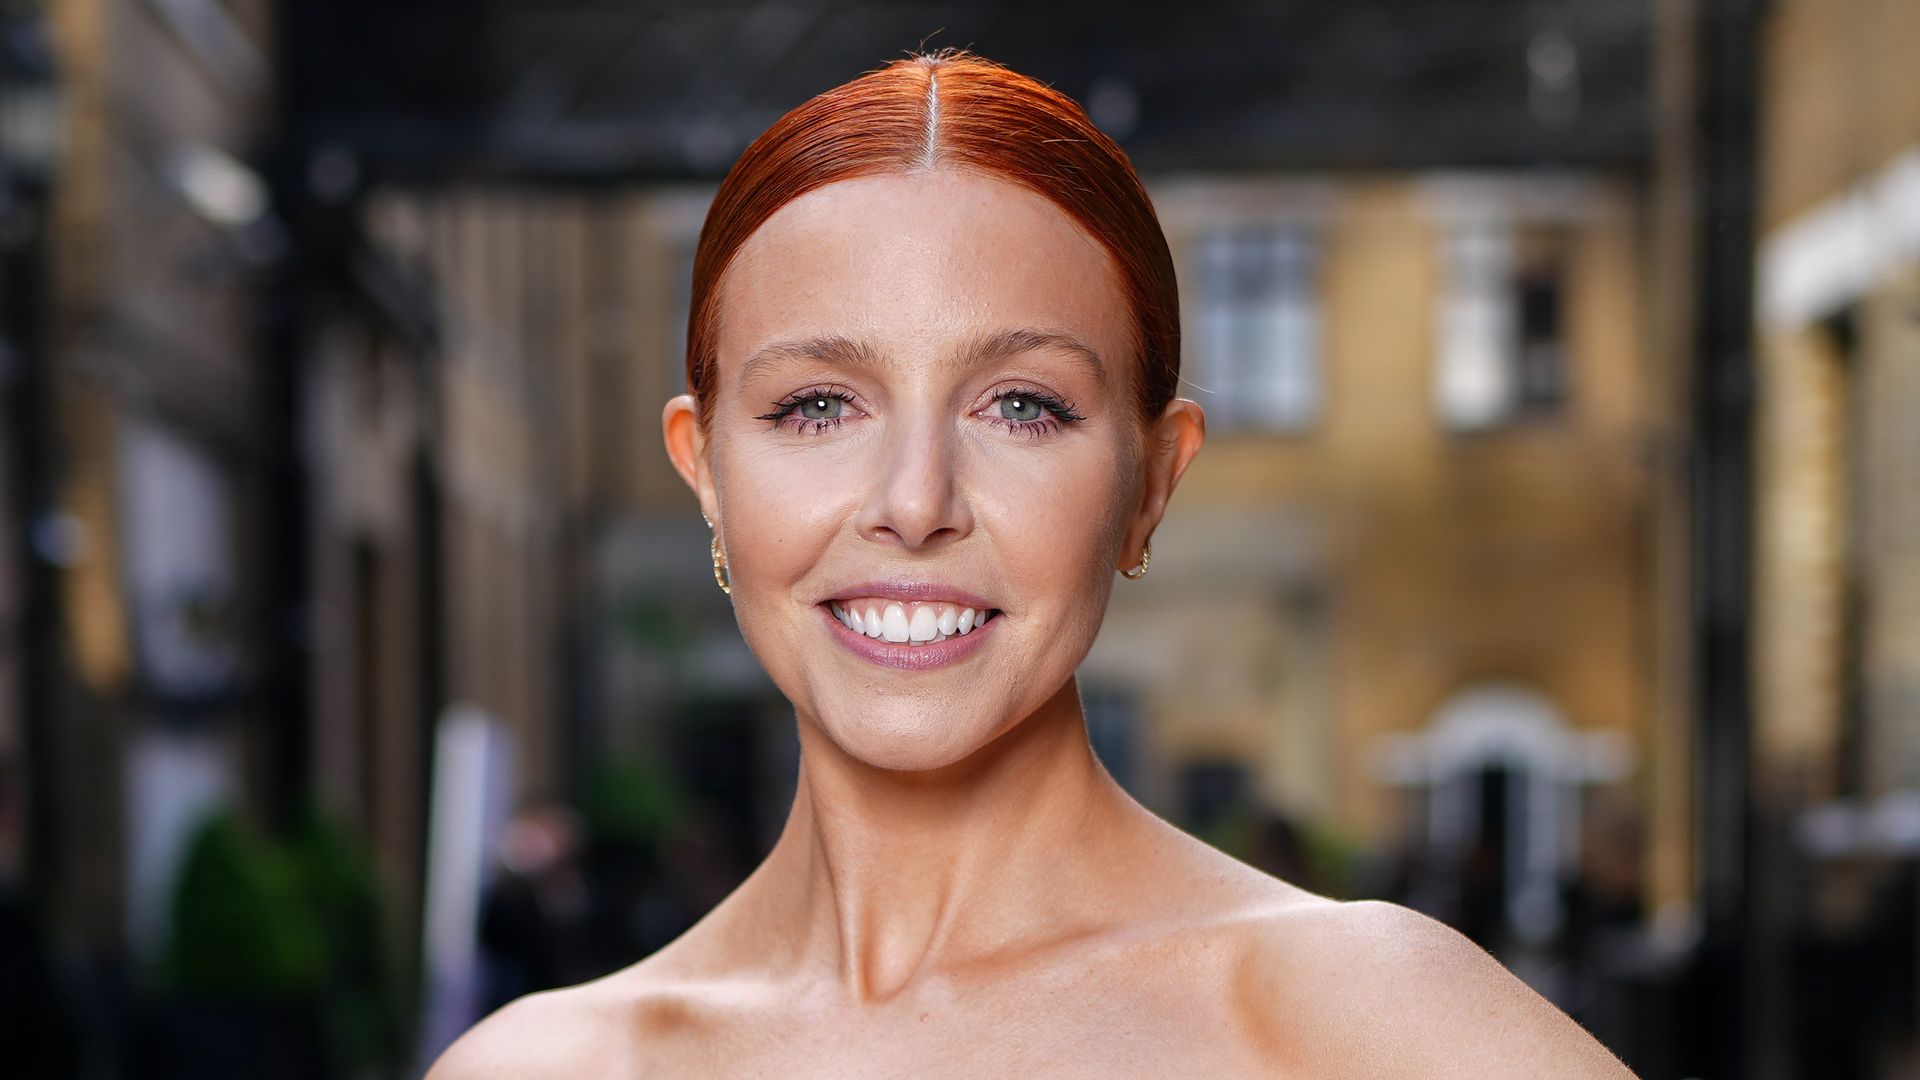 Stacey Dooley is a vision in Hailey Bieber's leg-lengthening red hot mini dress